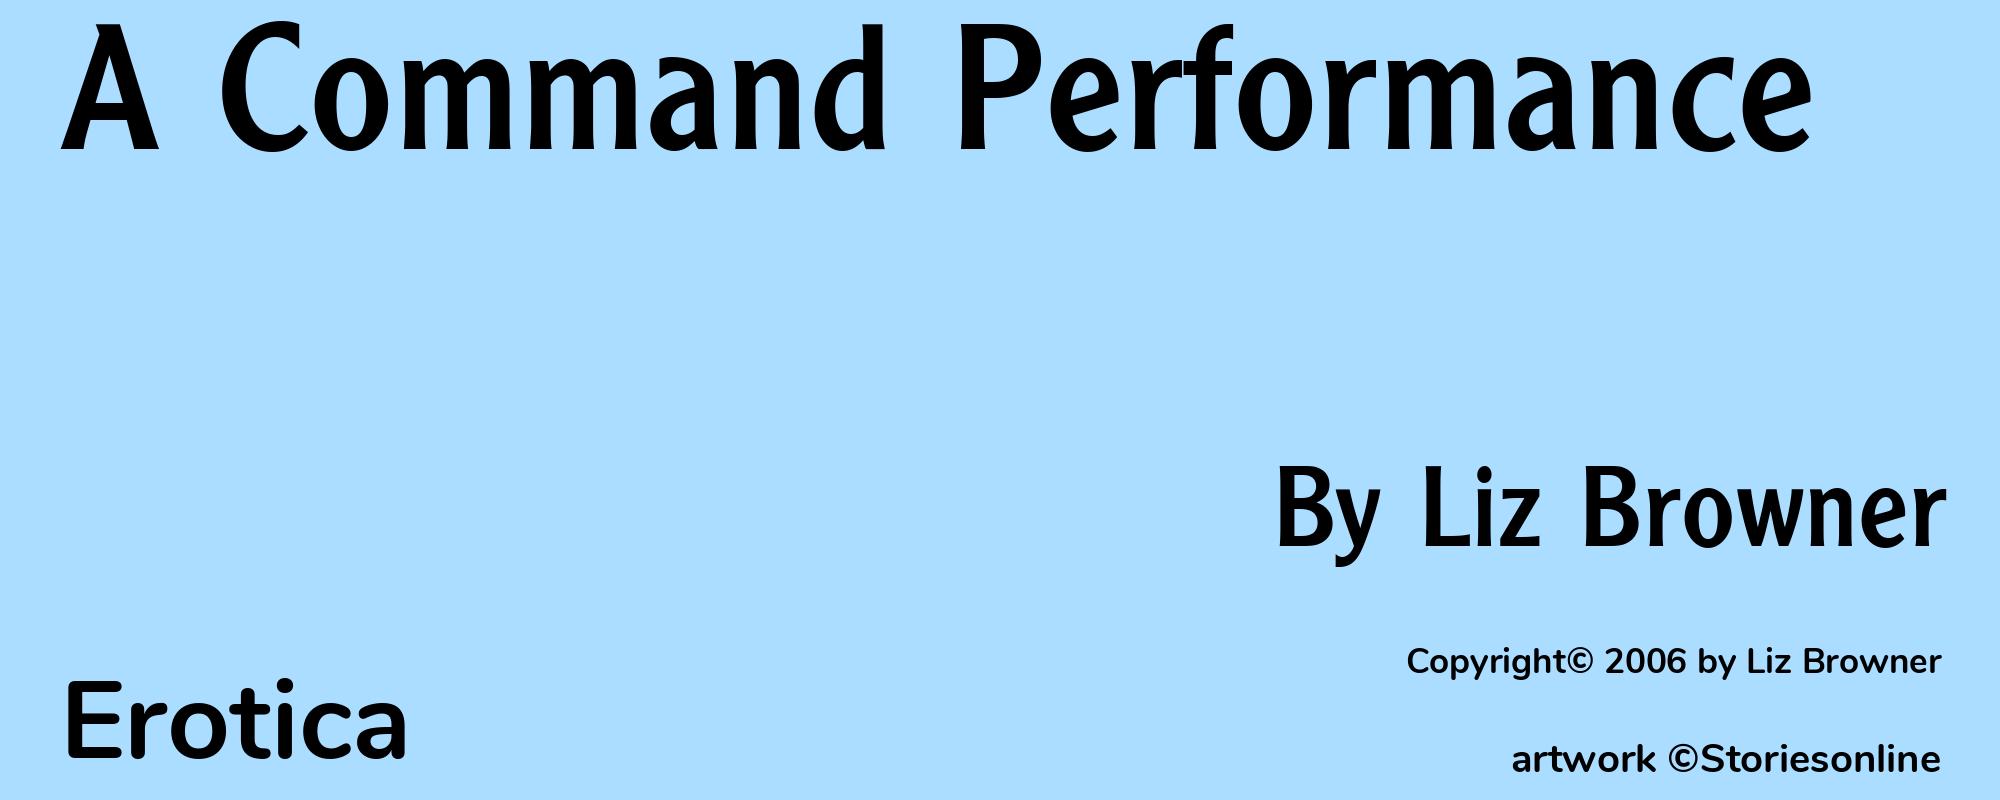 A Command Performance - Cover